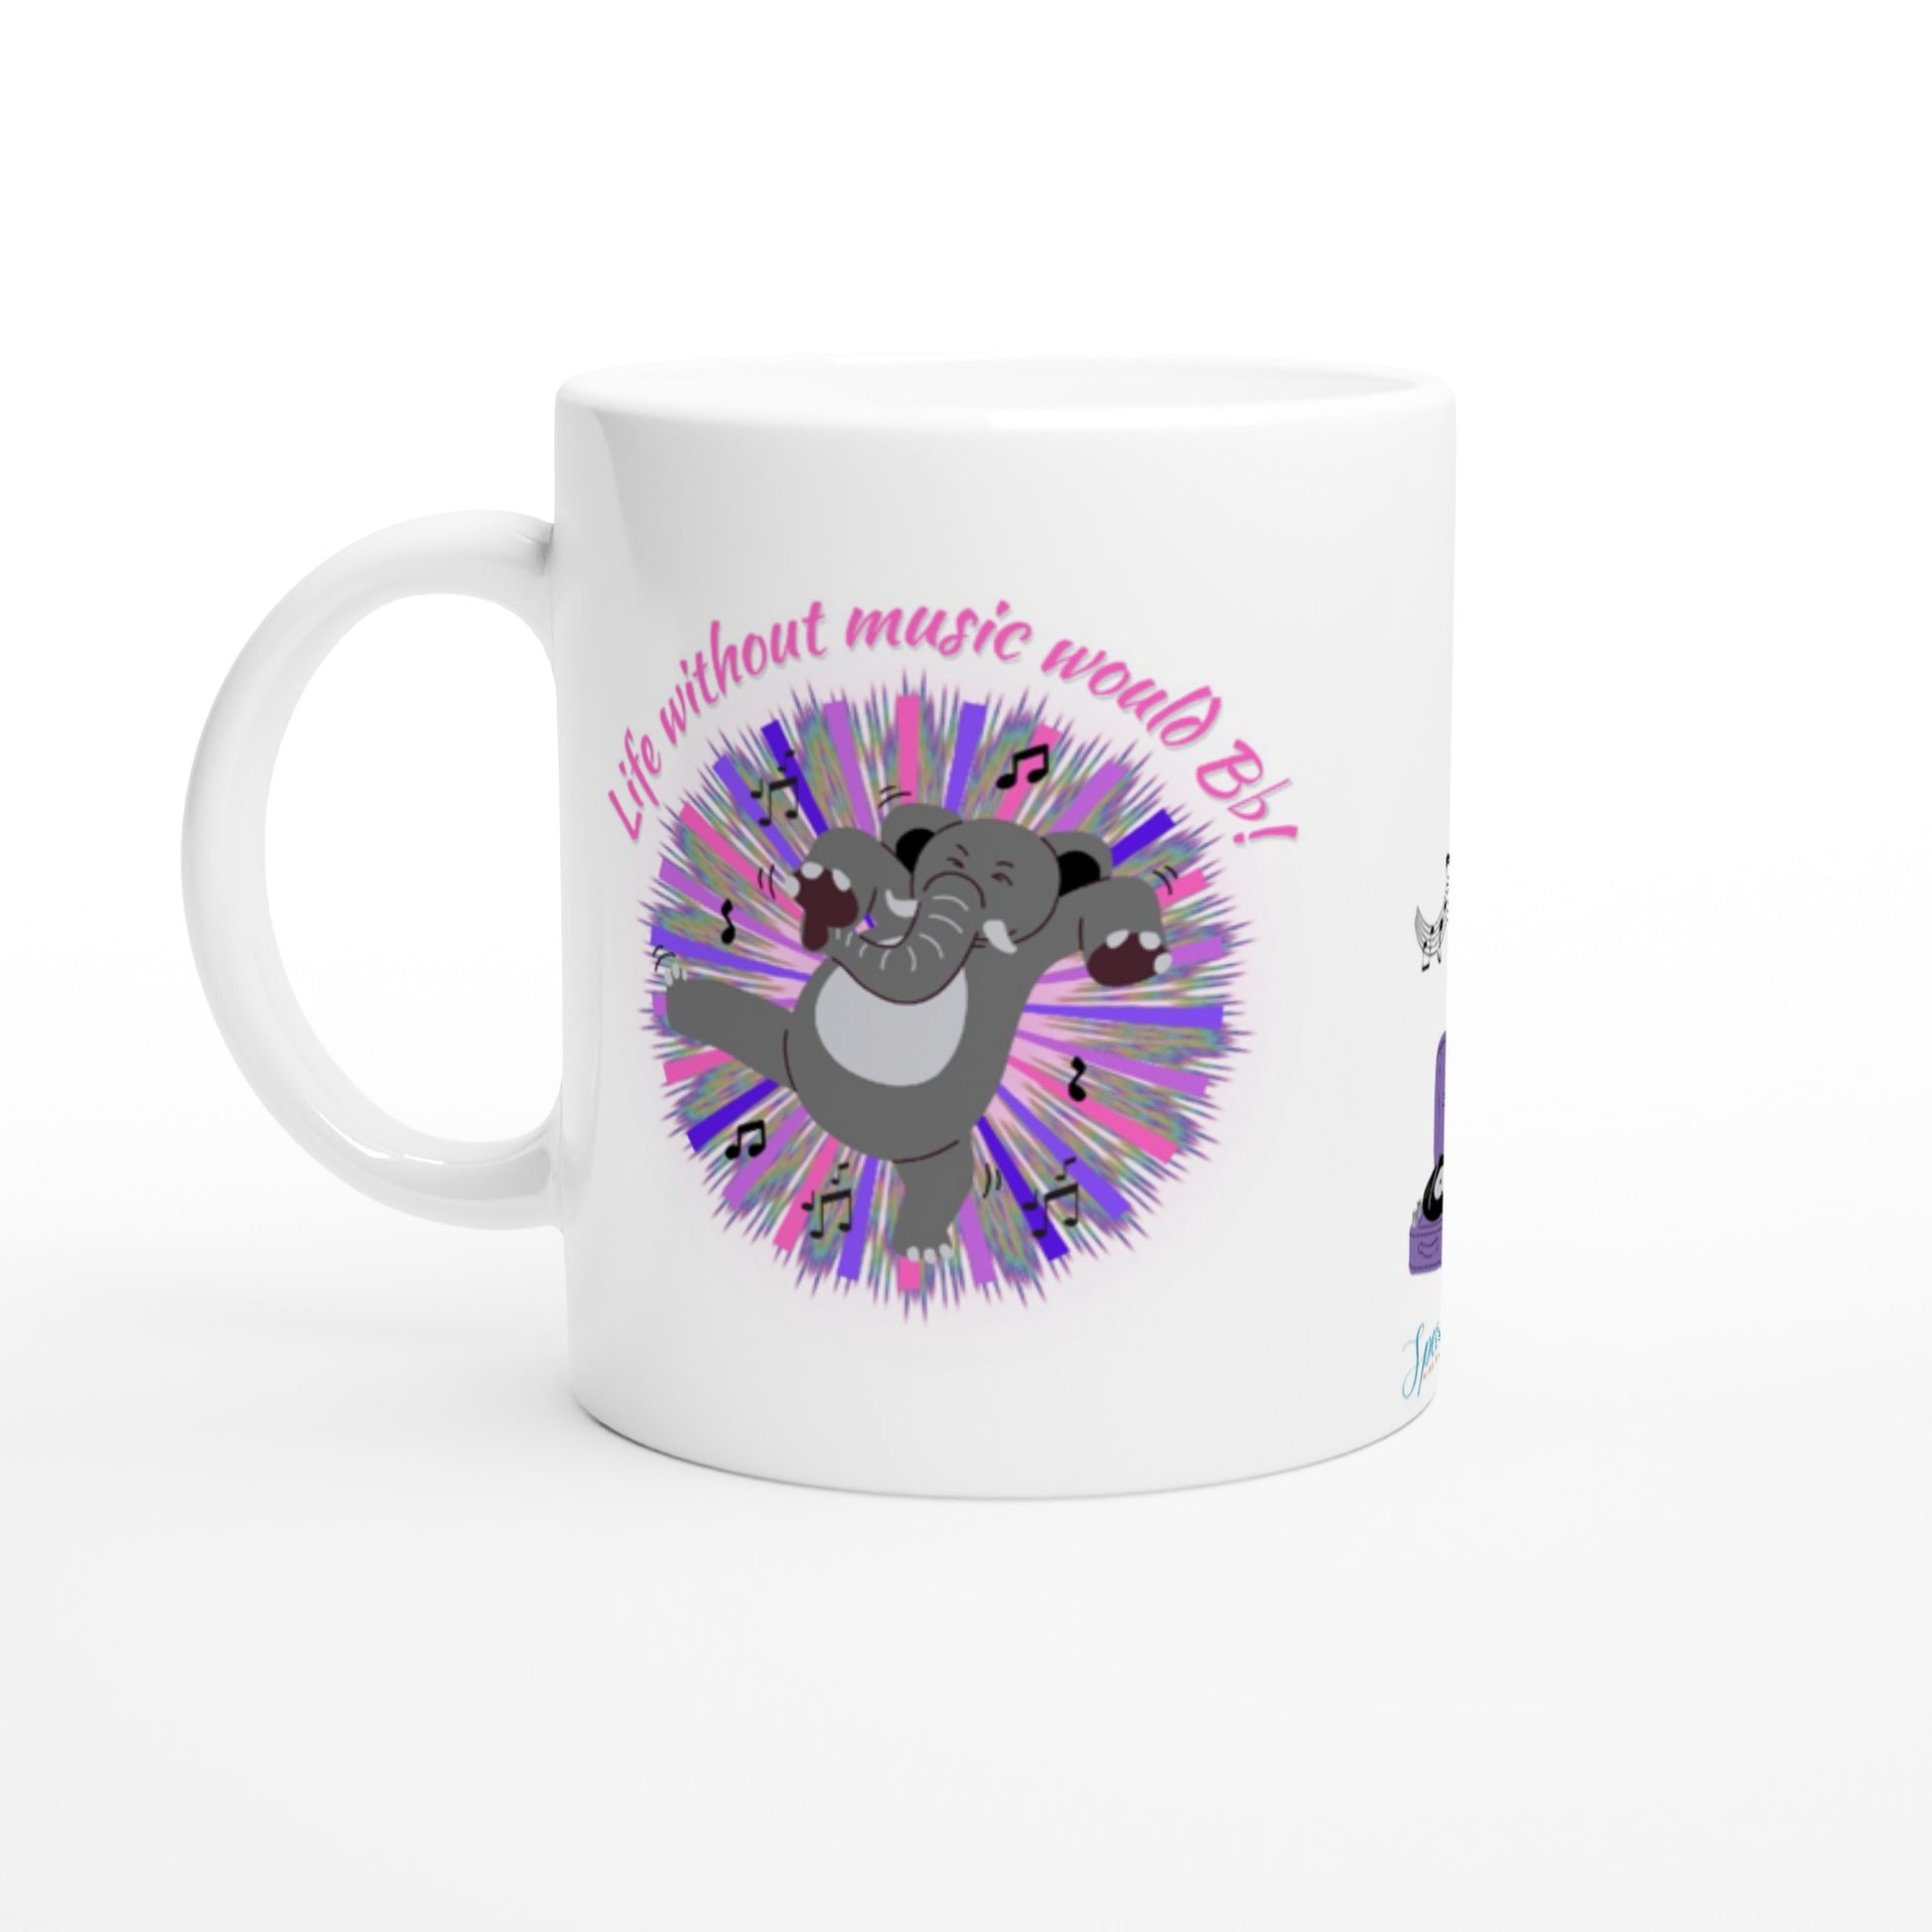 "Life without music would Bb!" 11 oz. Mug front view